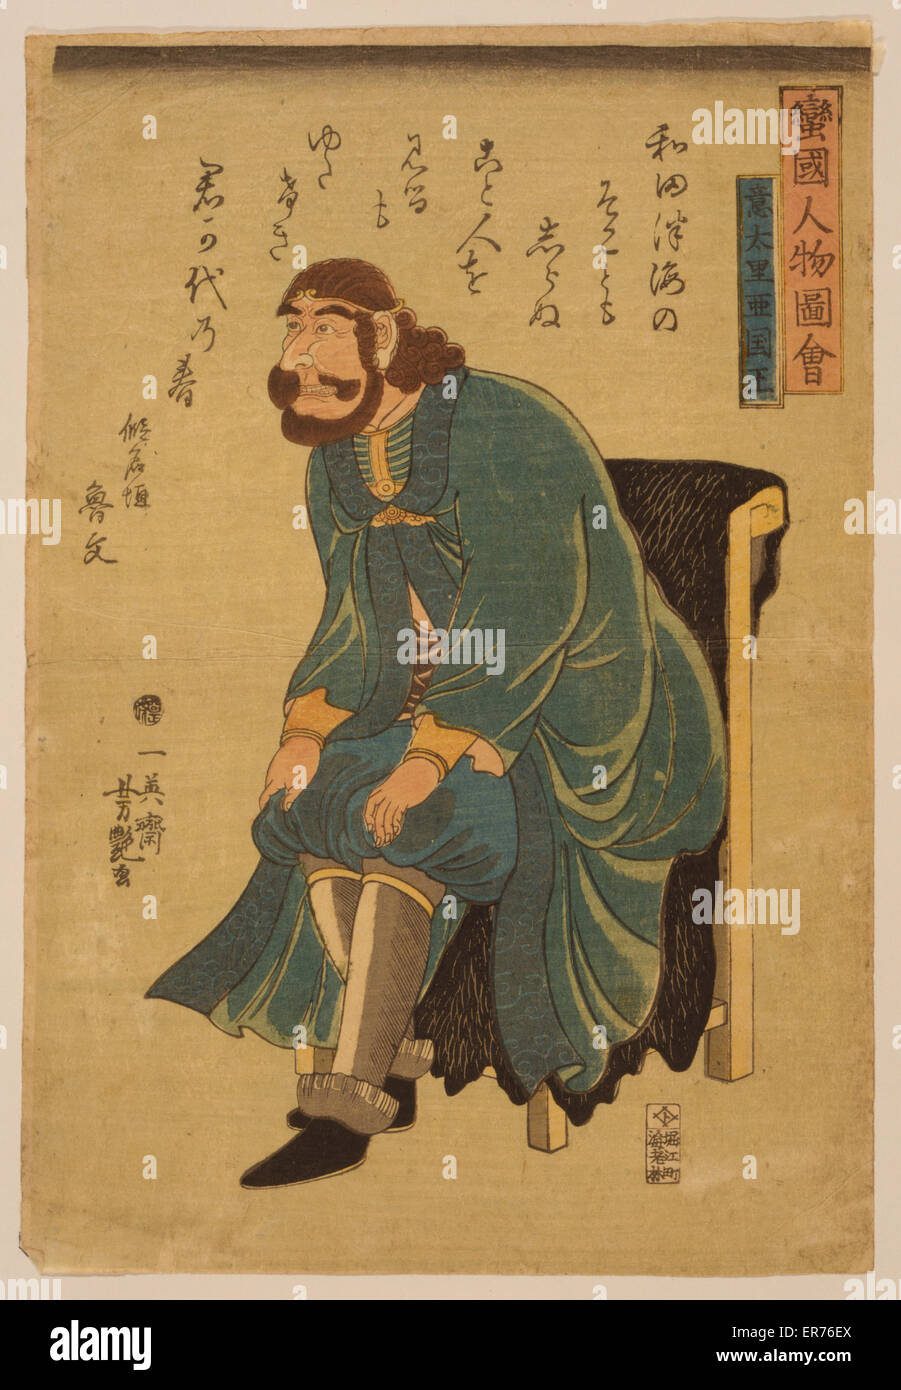 People of barbarian nations - king of Italy. Japanese print shows a full-length portrait of a man seated in a chair, facing left. Date 1861. Stock Photo